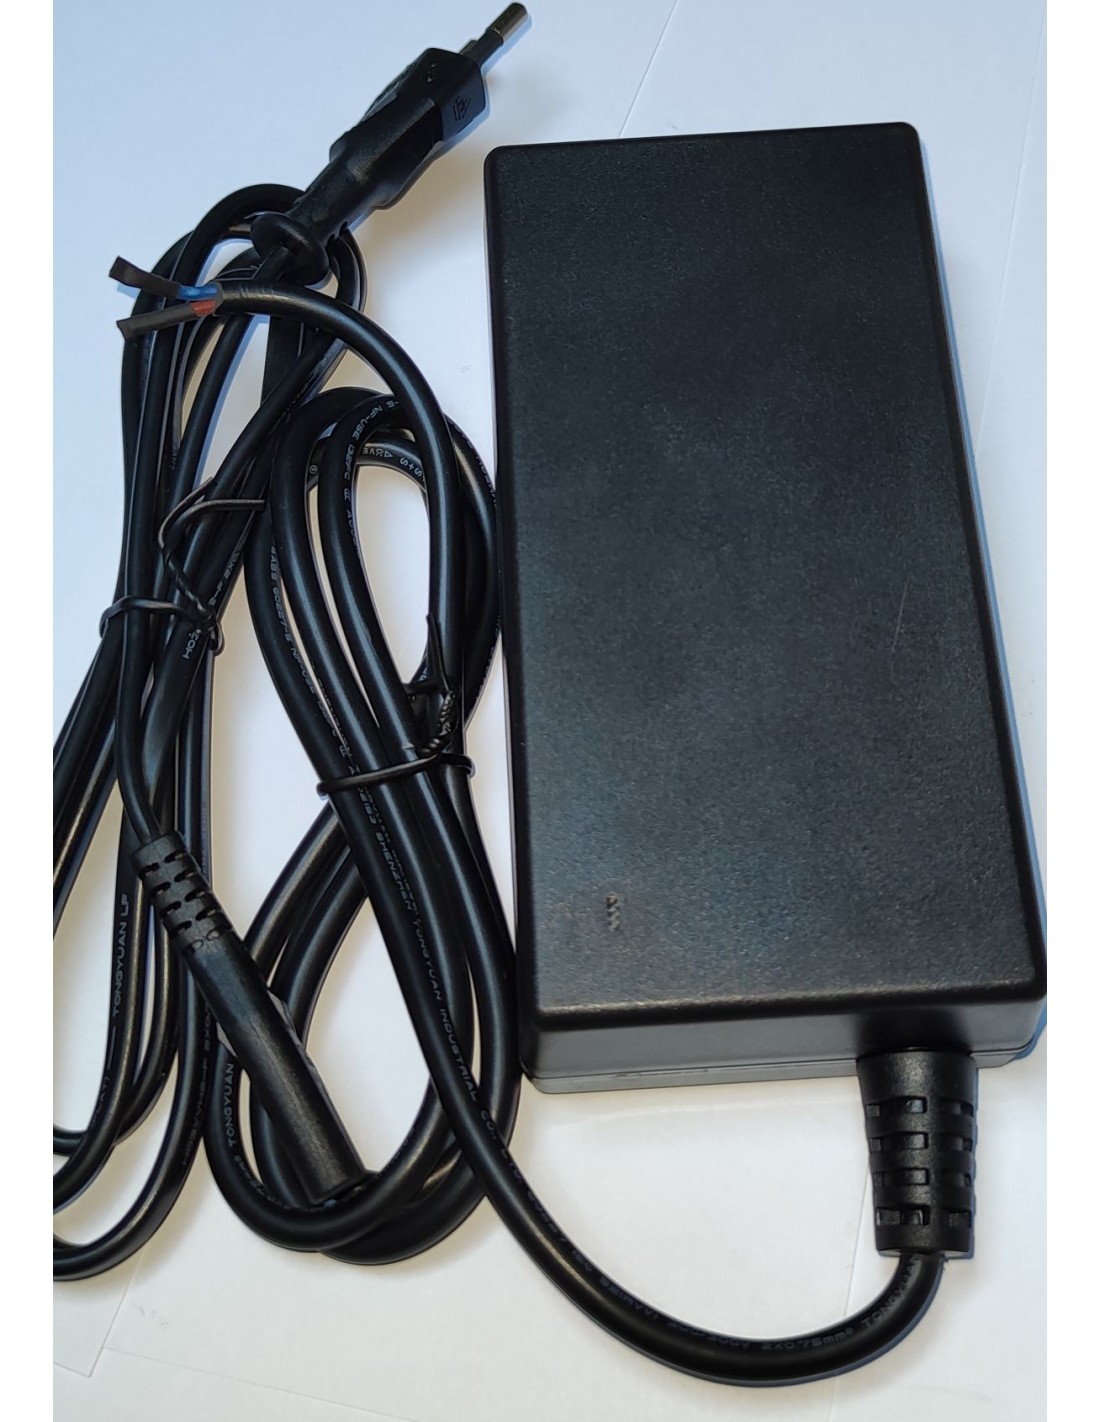 BMZ Lithium pack Charger for 10 cells 2Ah - Chargers / Power supply